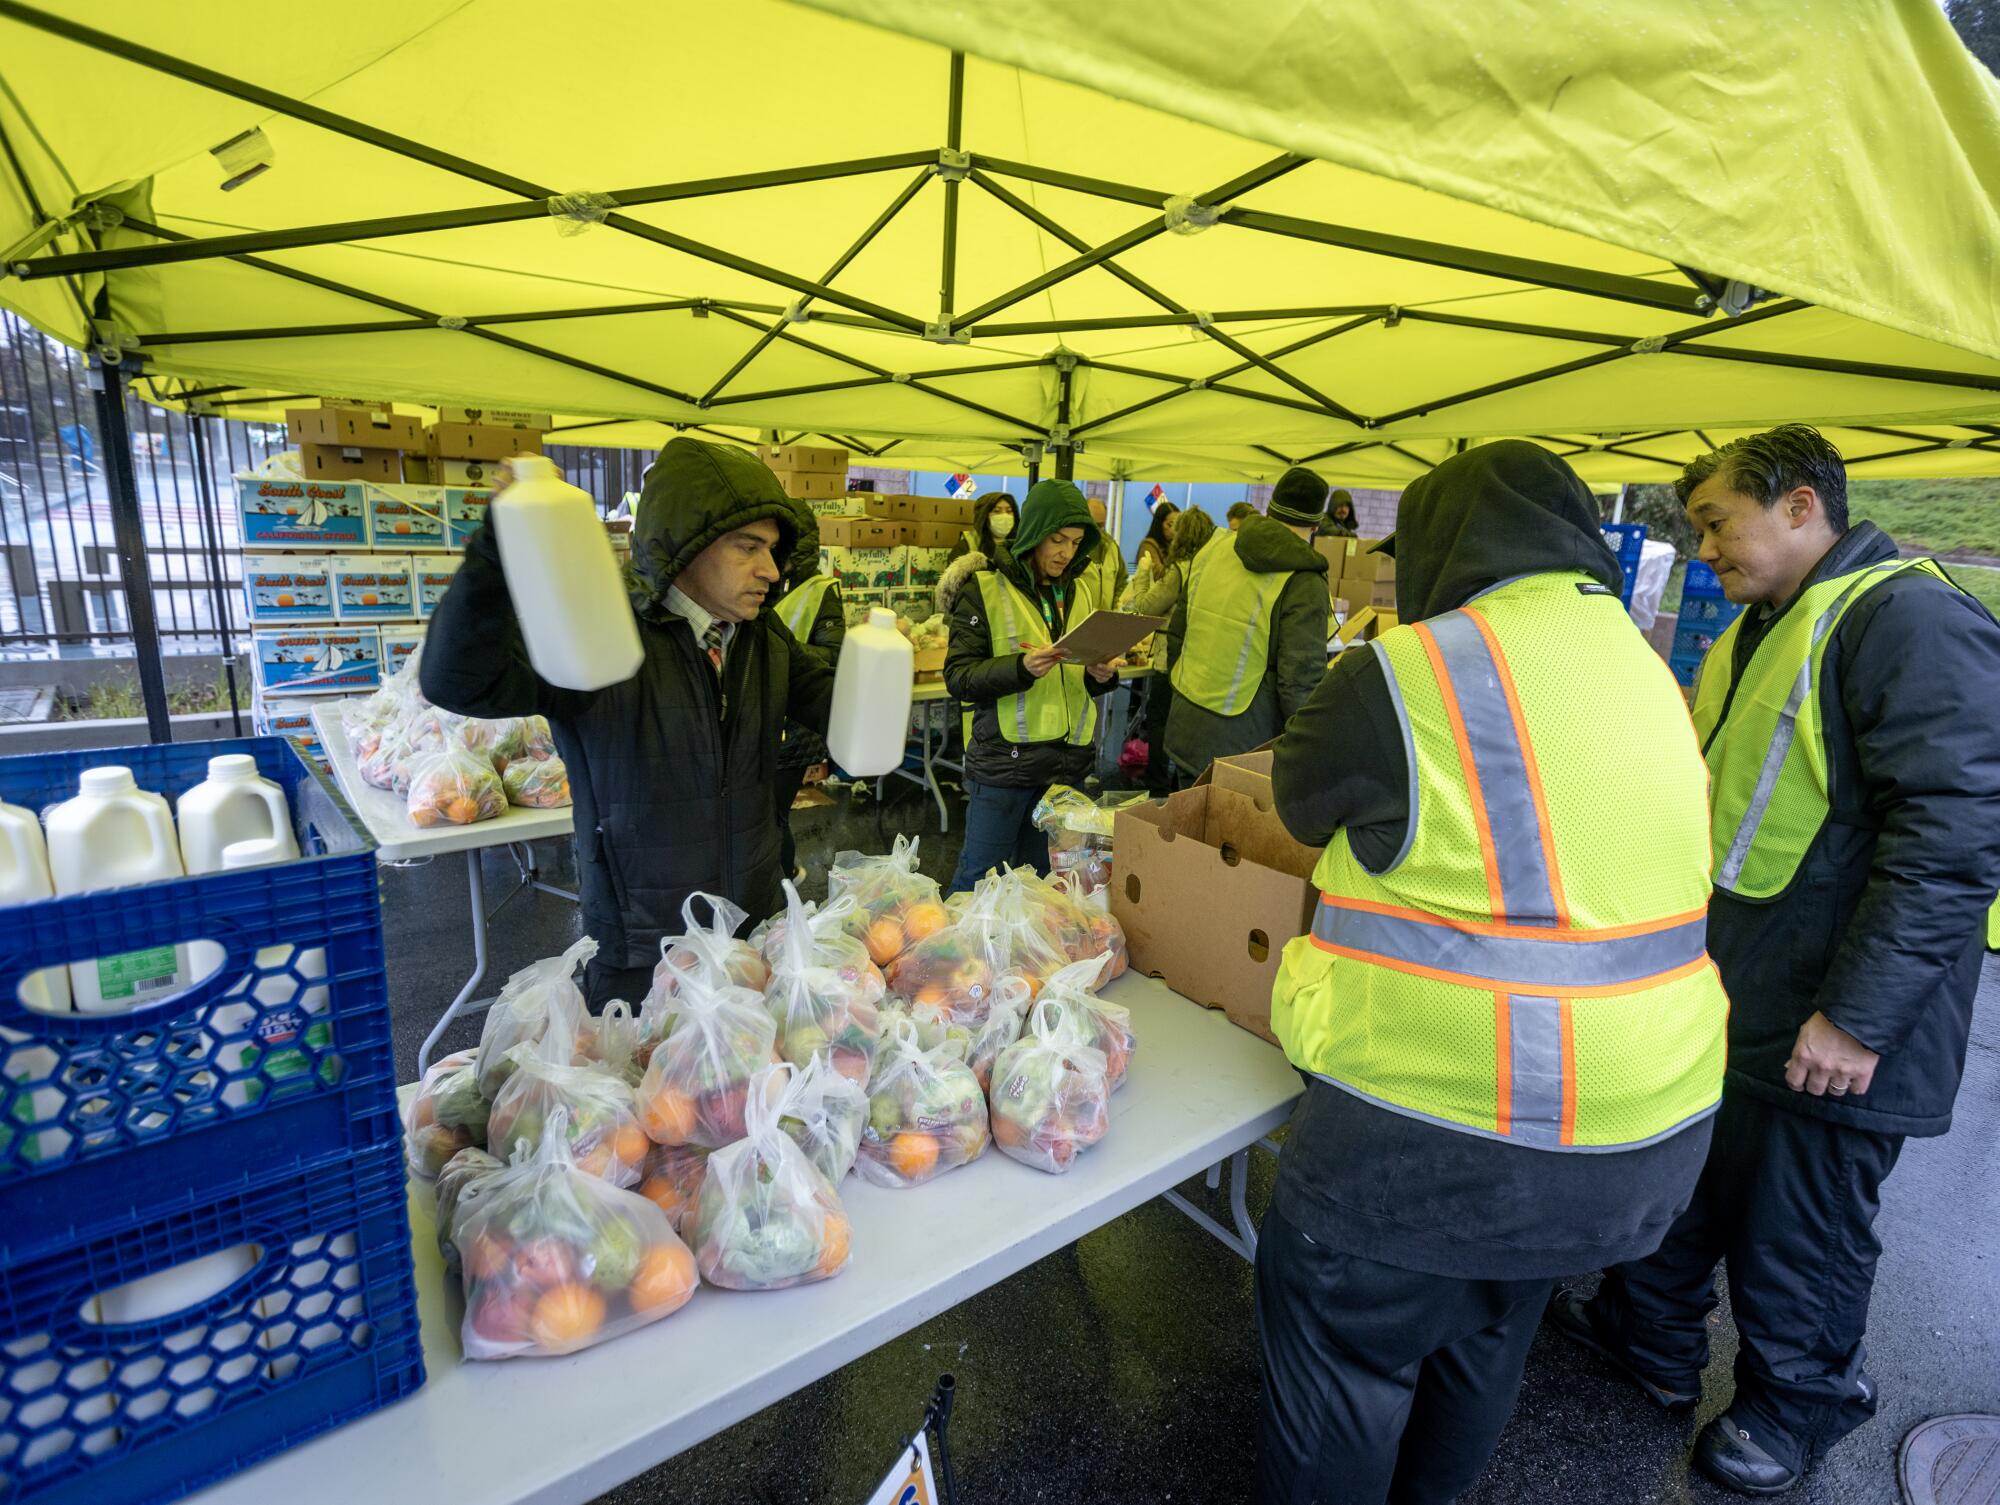 Workers distribute meals for students at an LAUSD grab & go site at the Lincoln Park Recreation Center in Los Angeles.